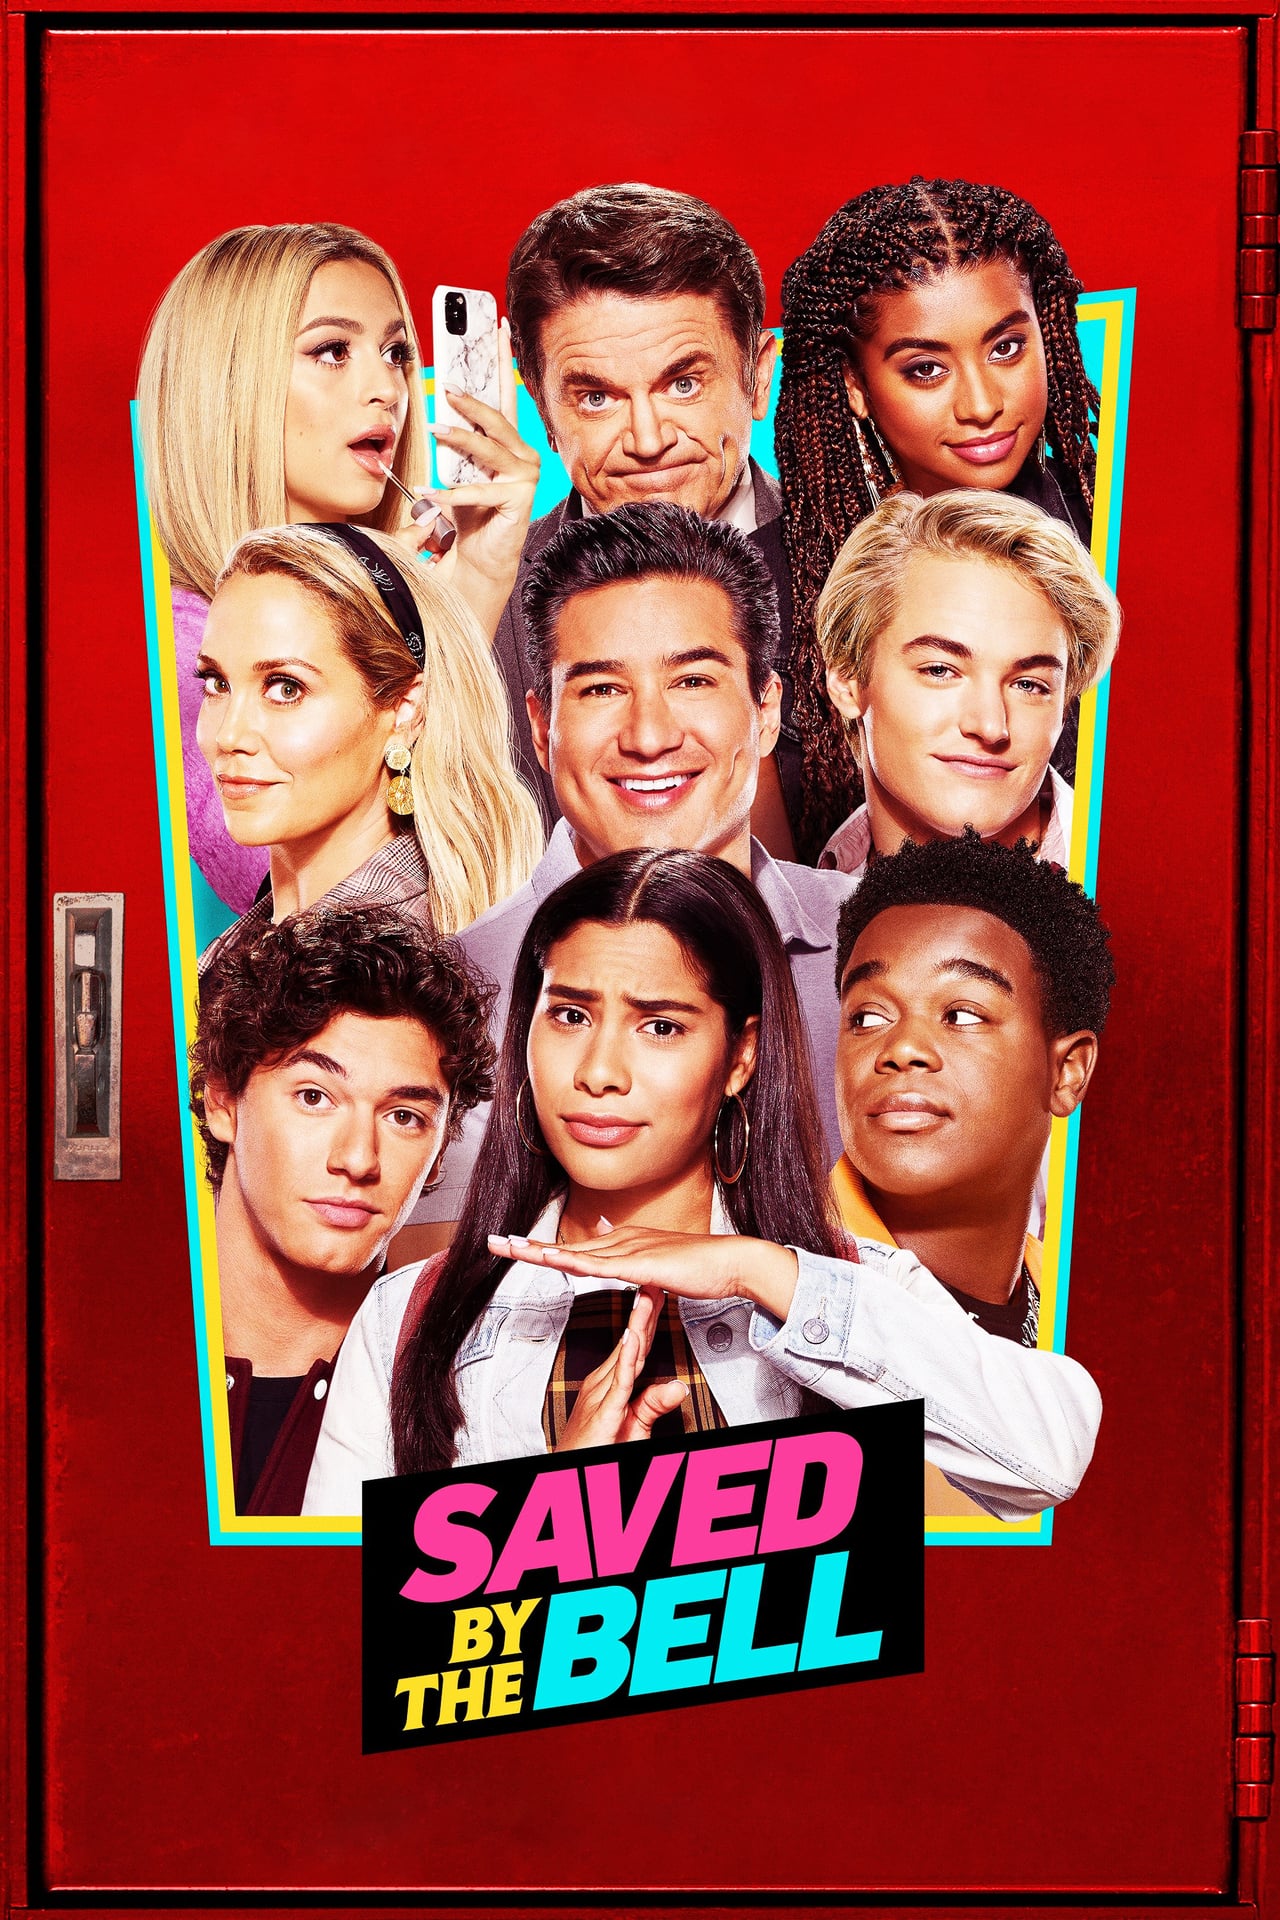 Saved by the Bell (season 1)